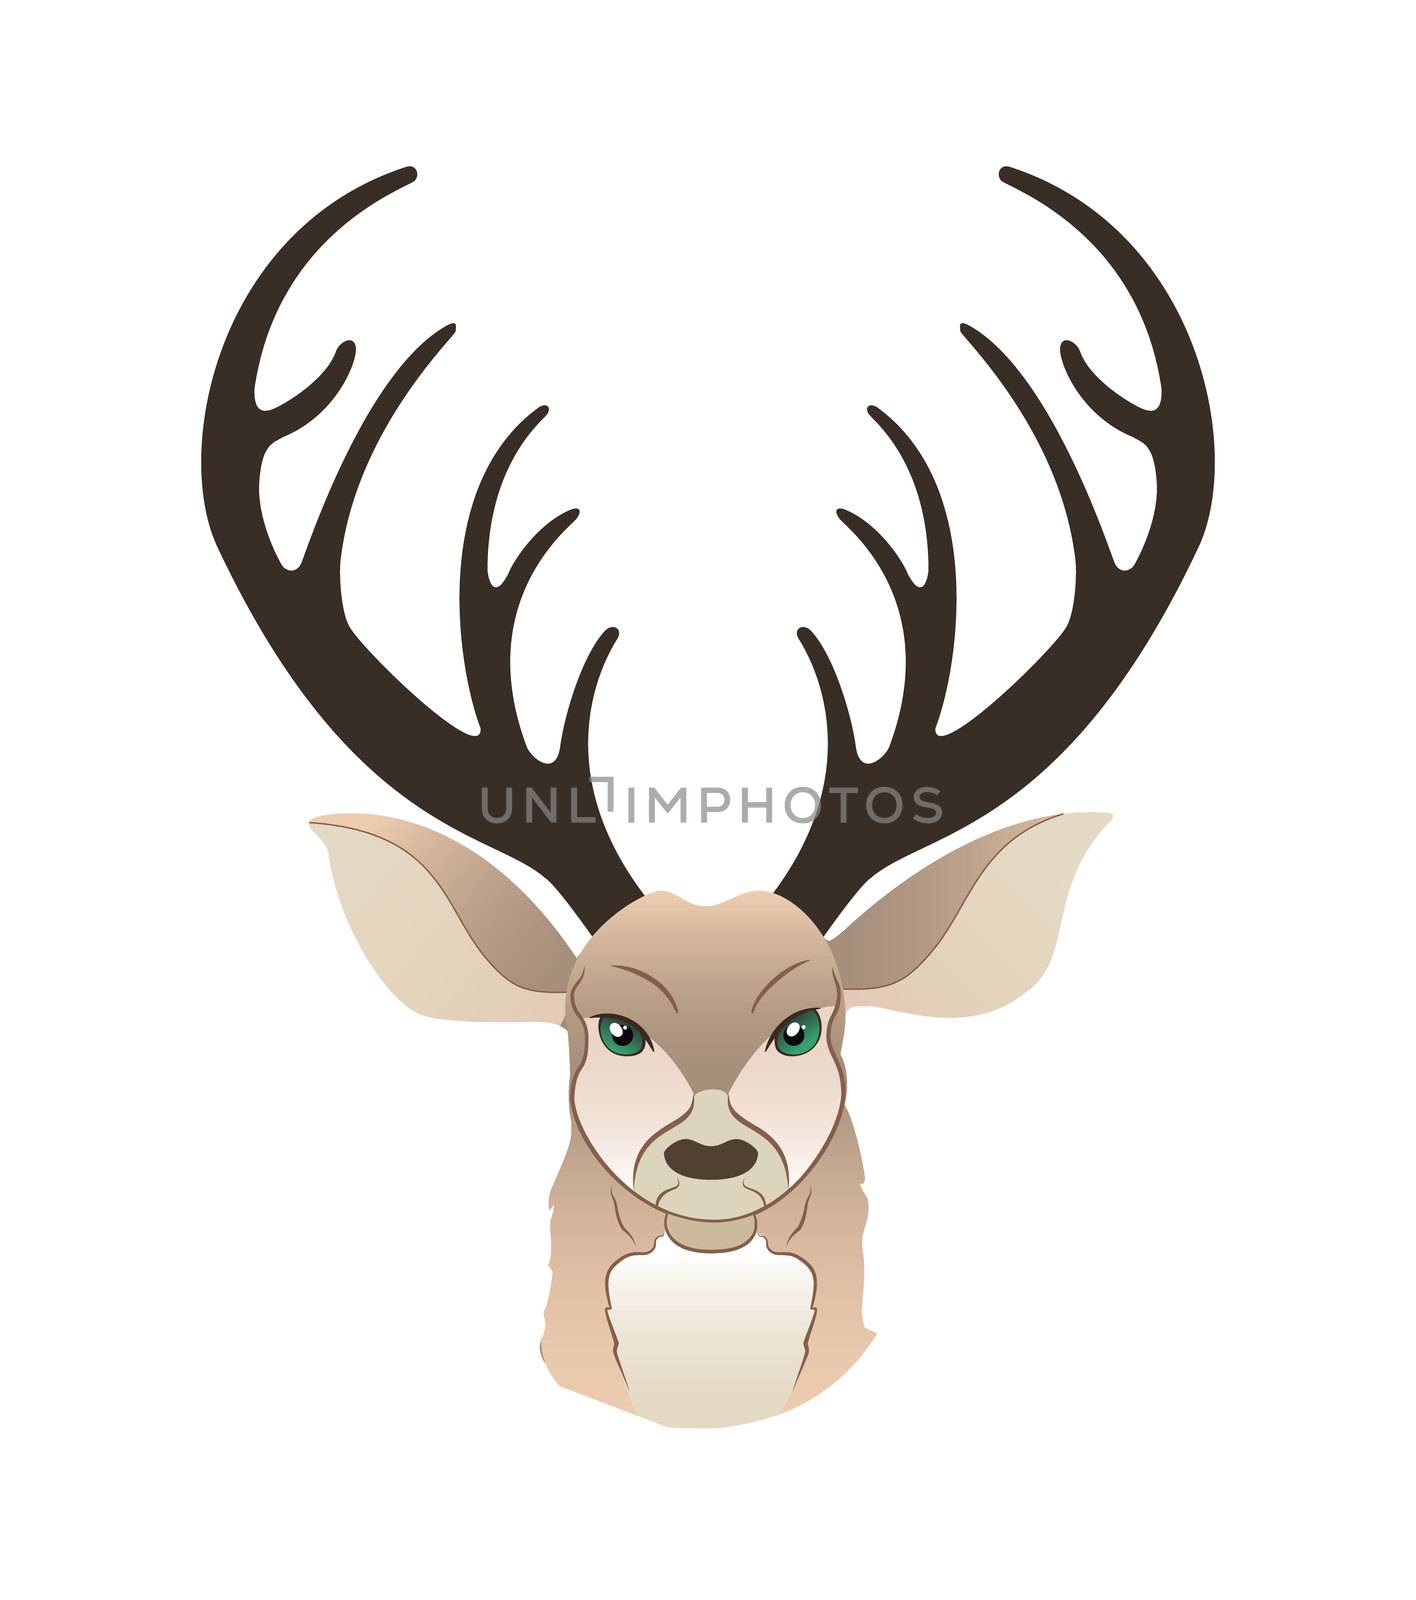 Fashion portrait of hipster deer. Reindeer dressed up in coat, furry art character, trand animals, anthropomorphism. illustration for t-shirt print, card, poster, banner